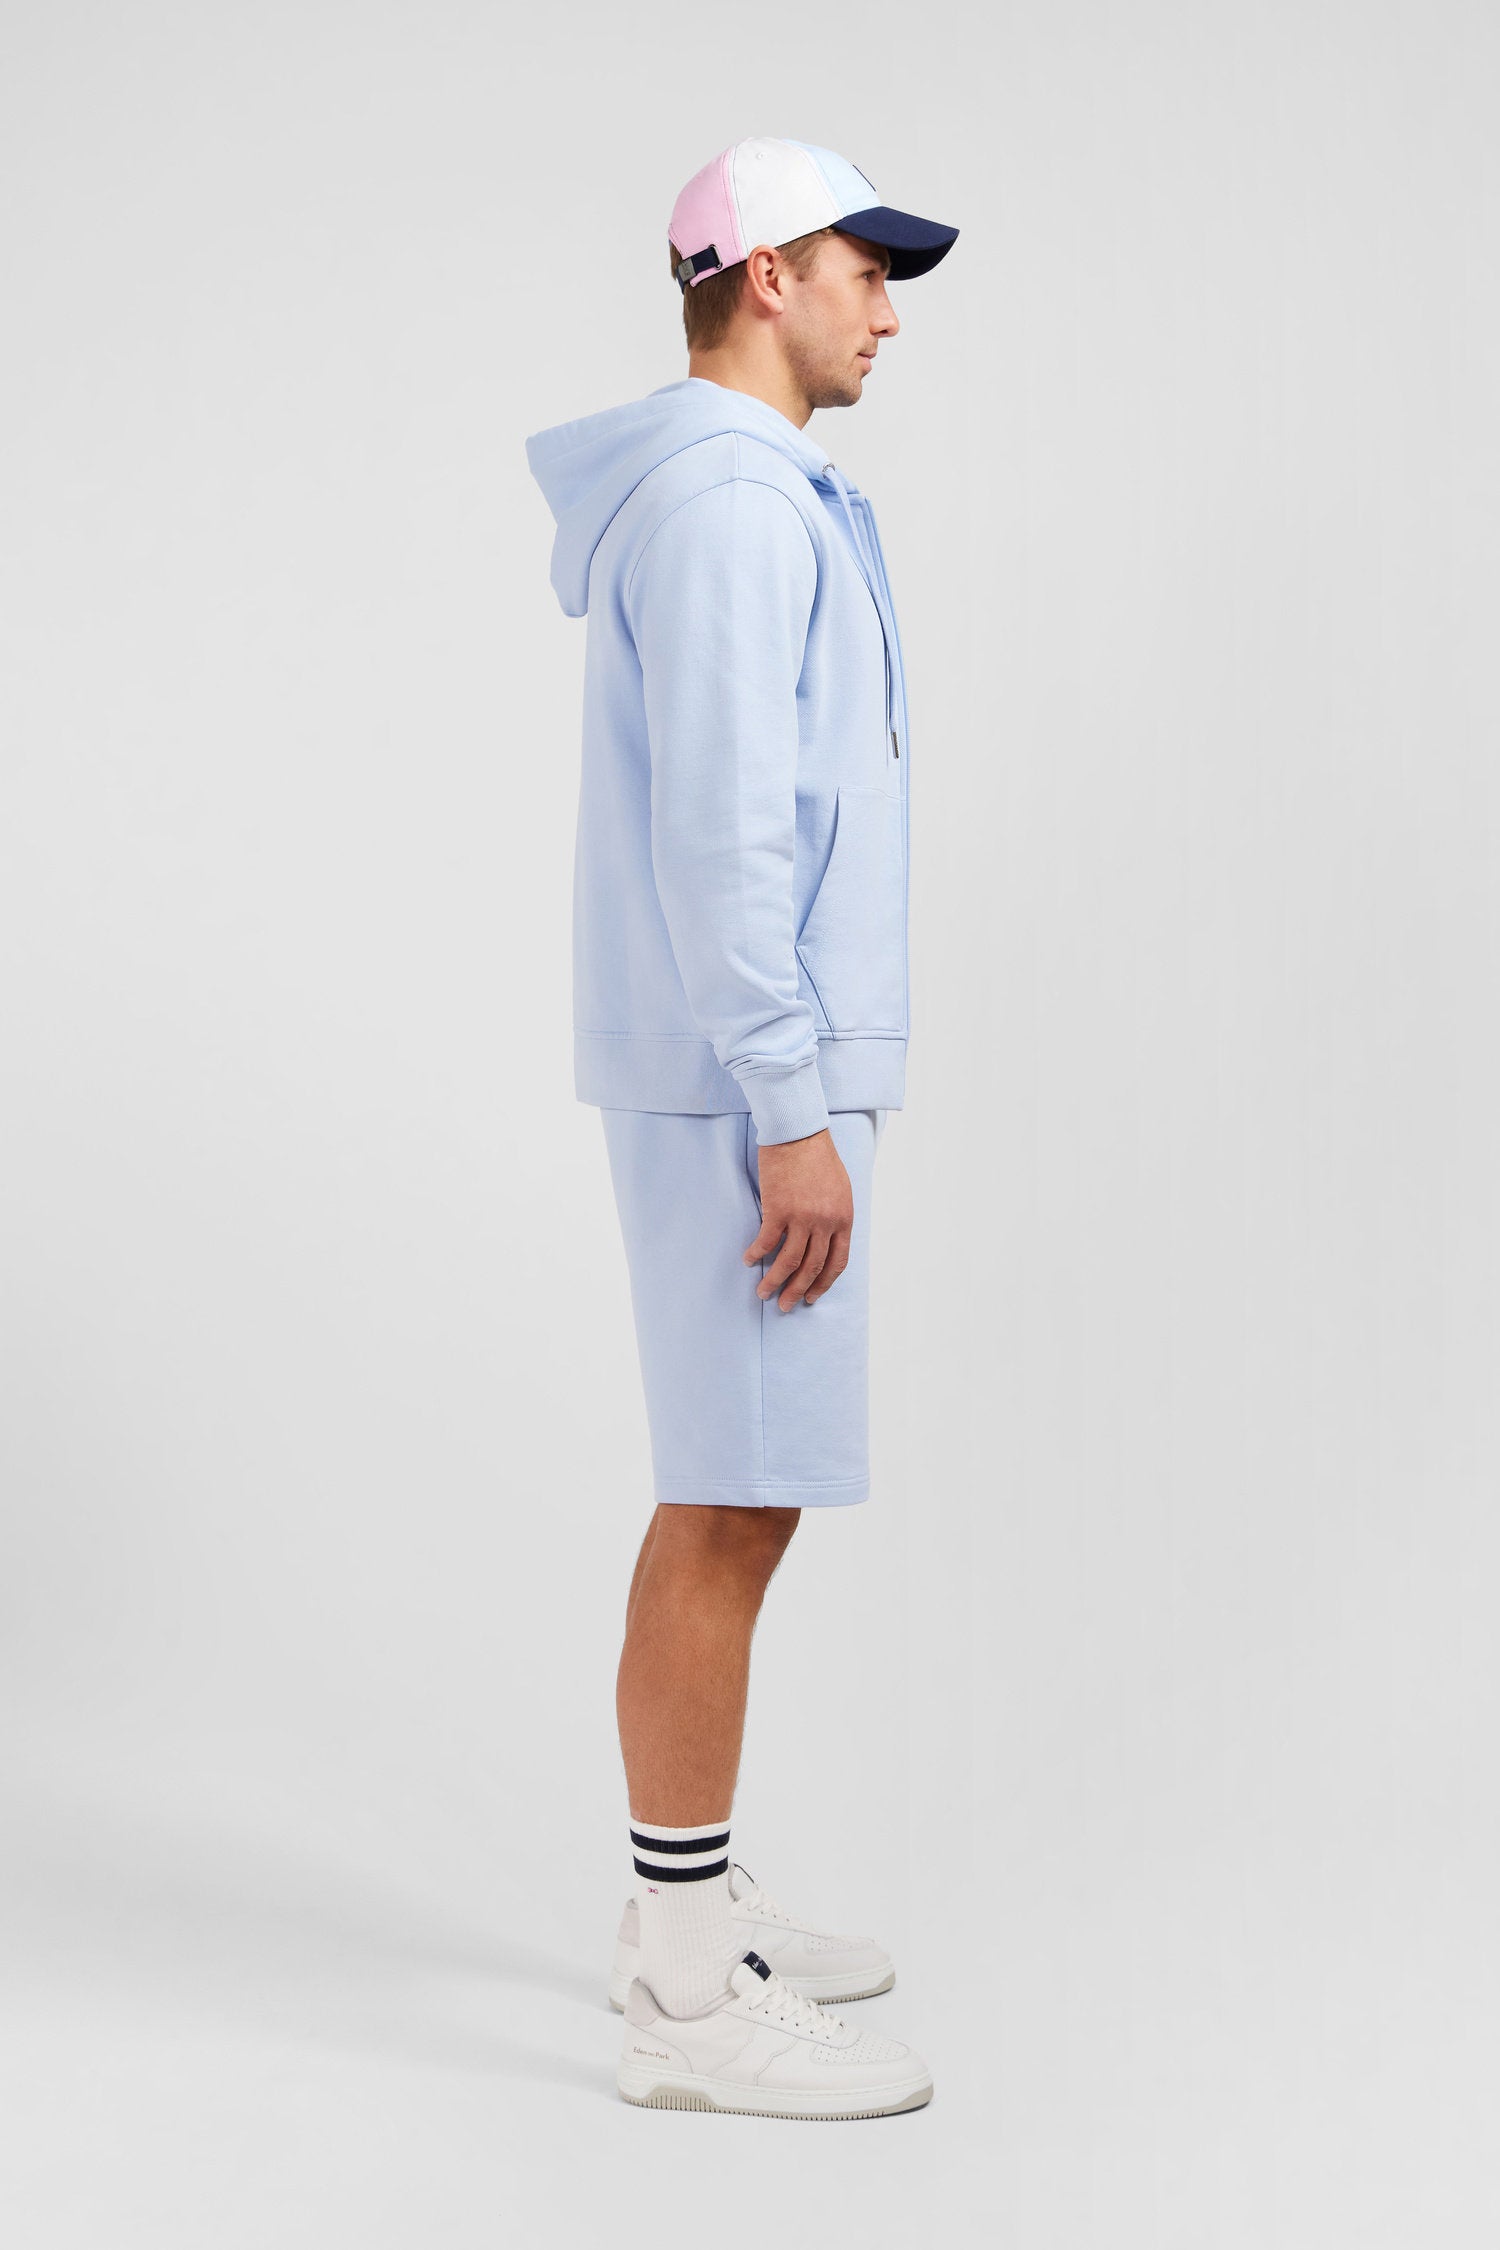 Blue Fleece Zipped Hoodie With Bow Tie Embroidery_E24MAISW0050_BLC6_04